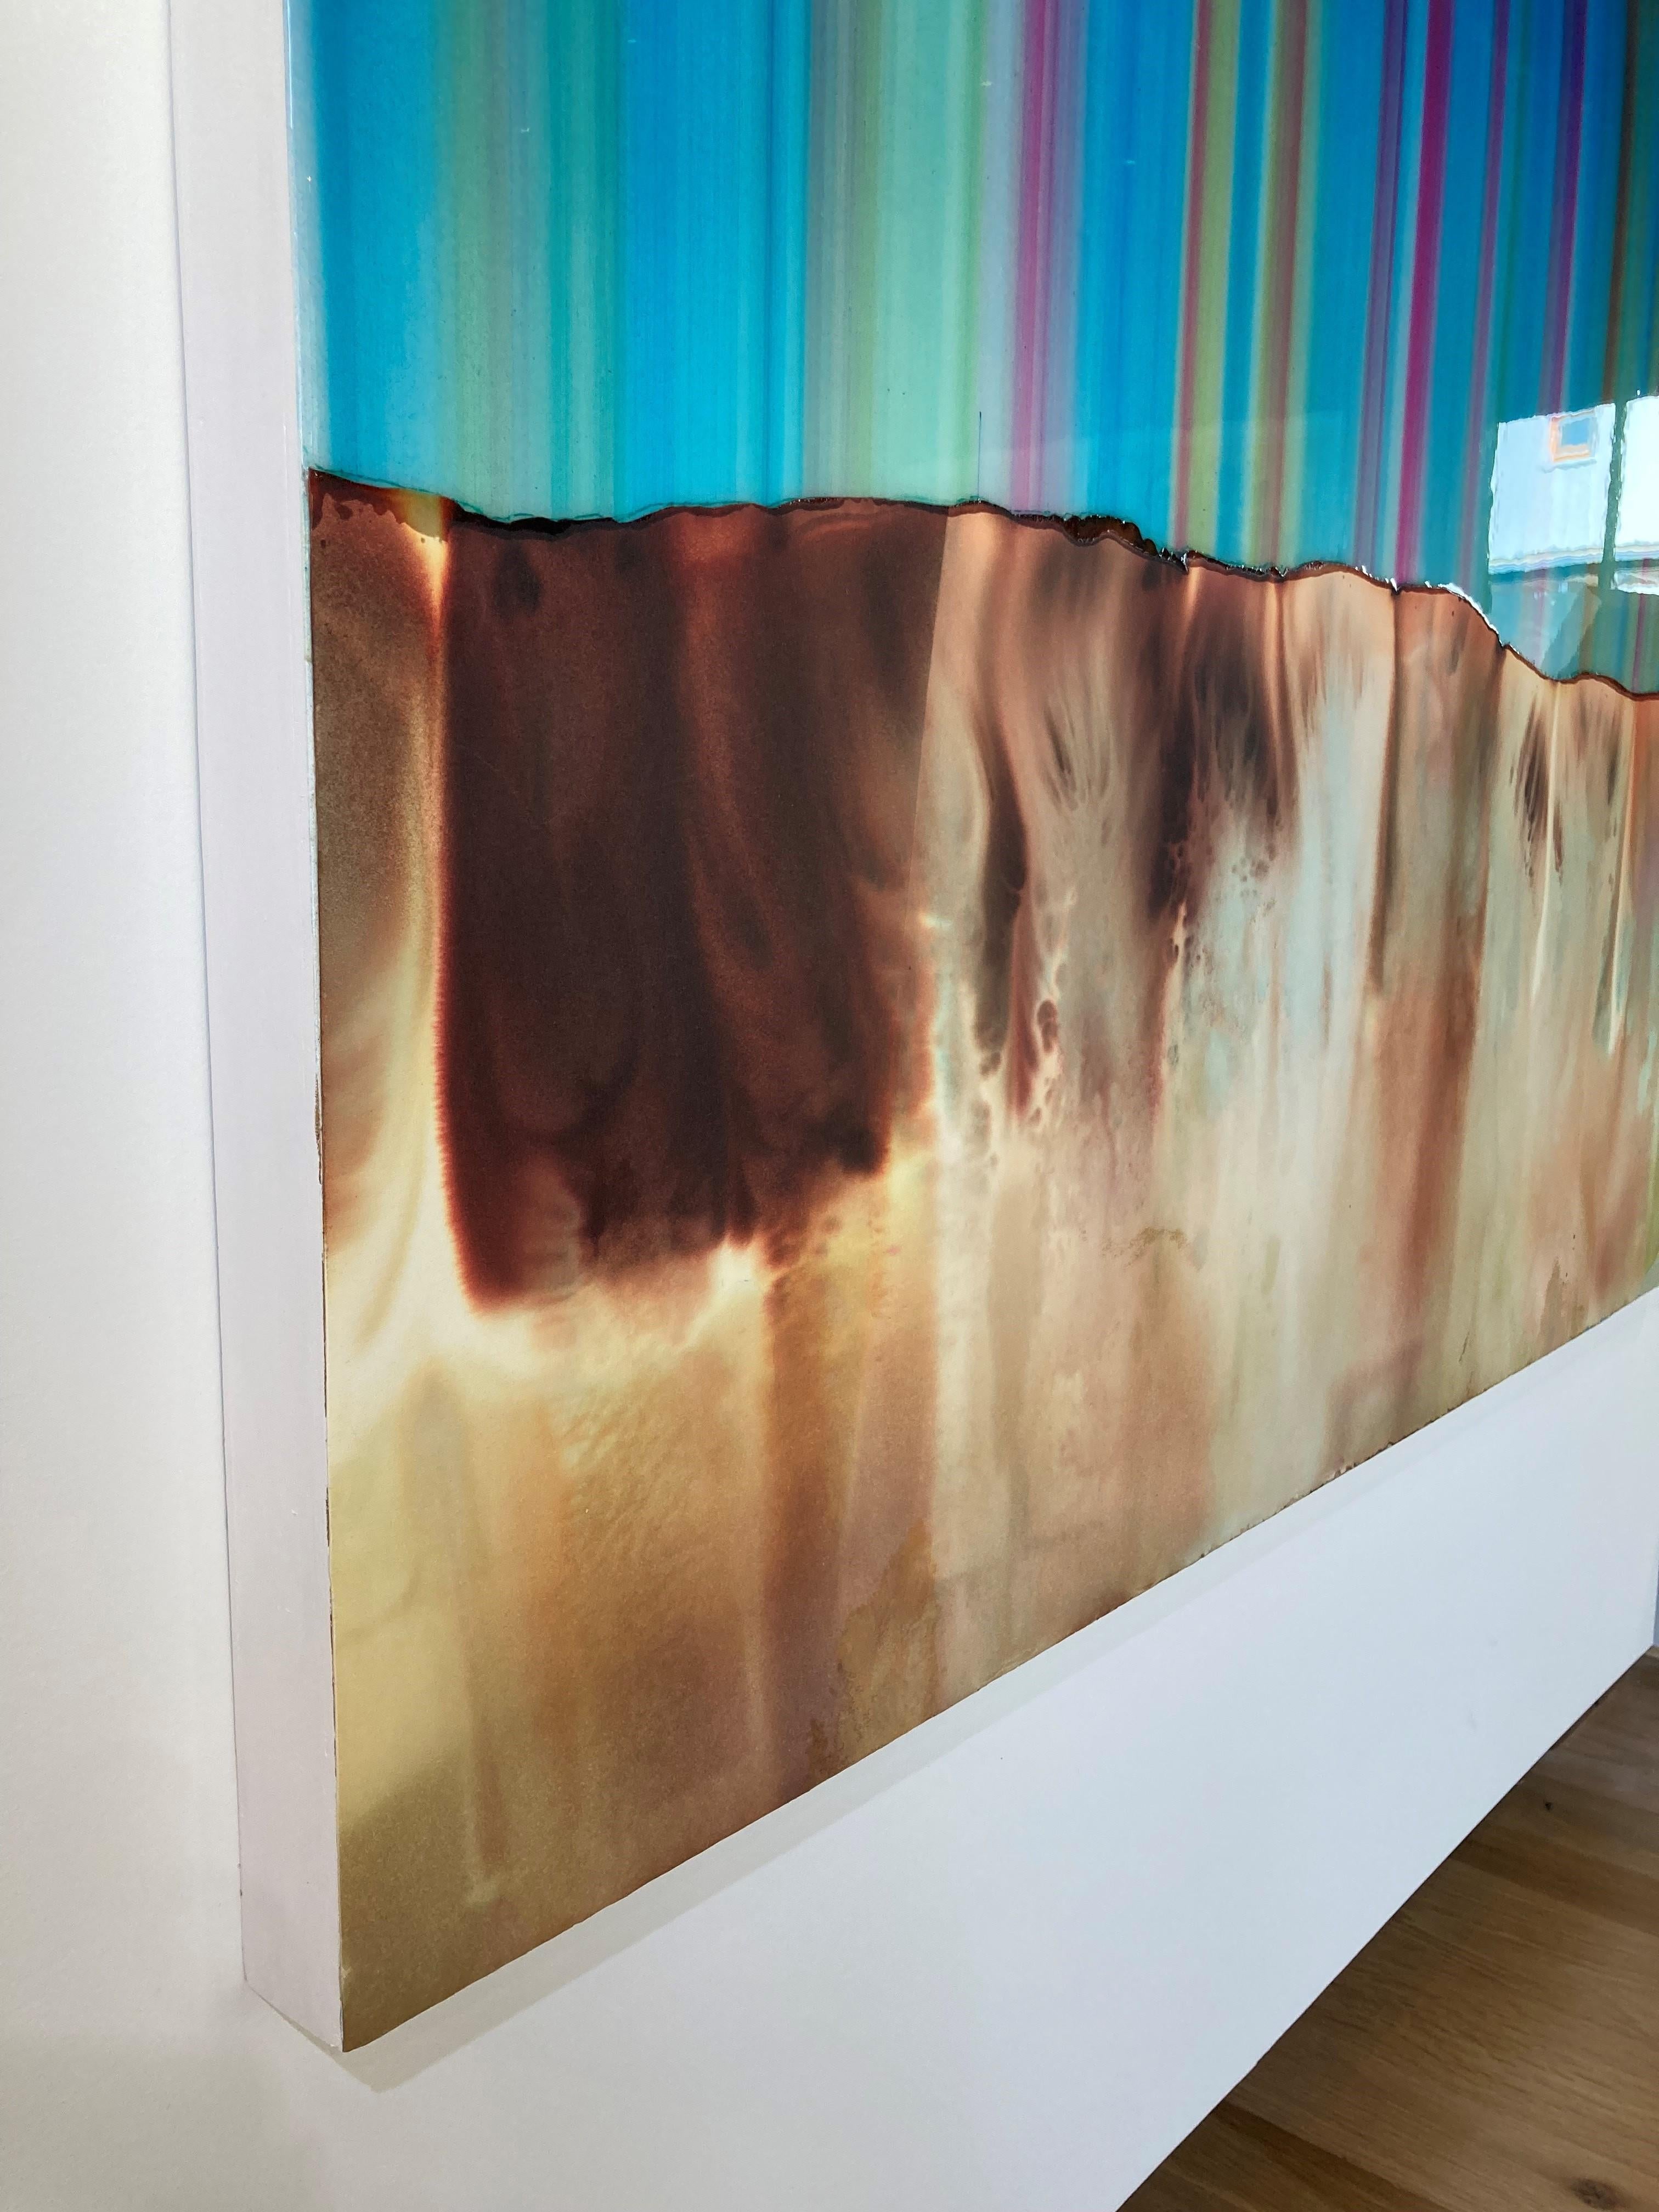 Striations of bright blue, teal green and pink in vertical stripes create an abstract horizon line suggesting a vibrant striped sky over a vast mountain range in golden brown with hints of bright olive green, while layers of resin on the top half